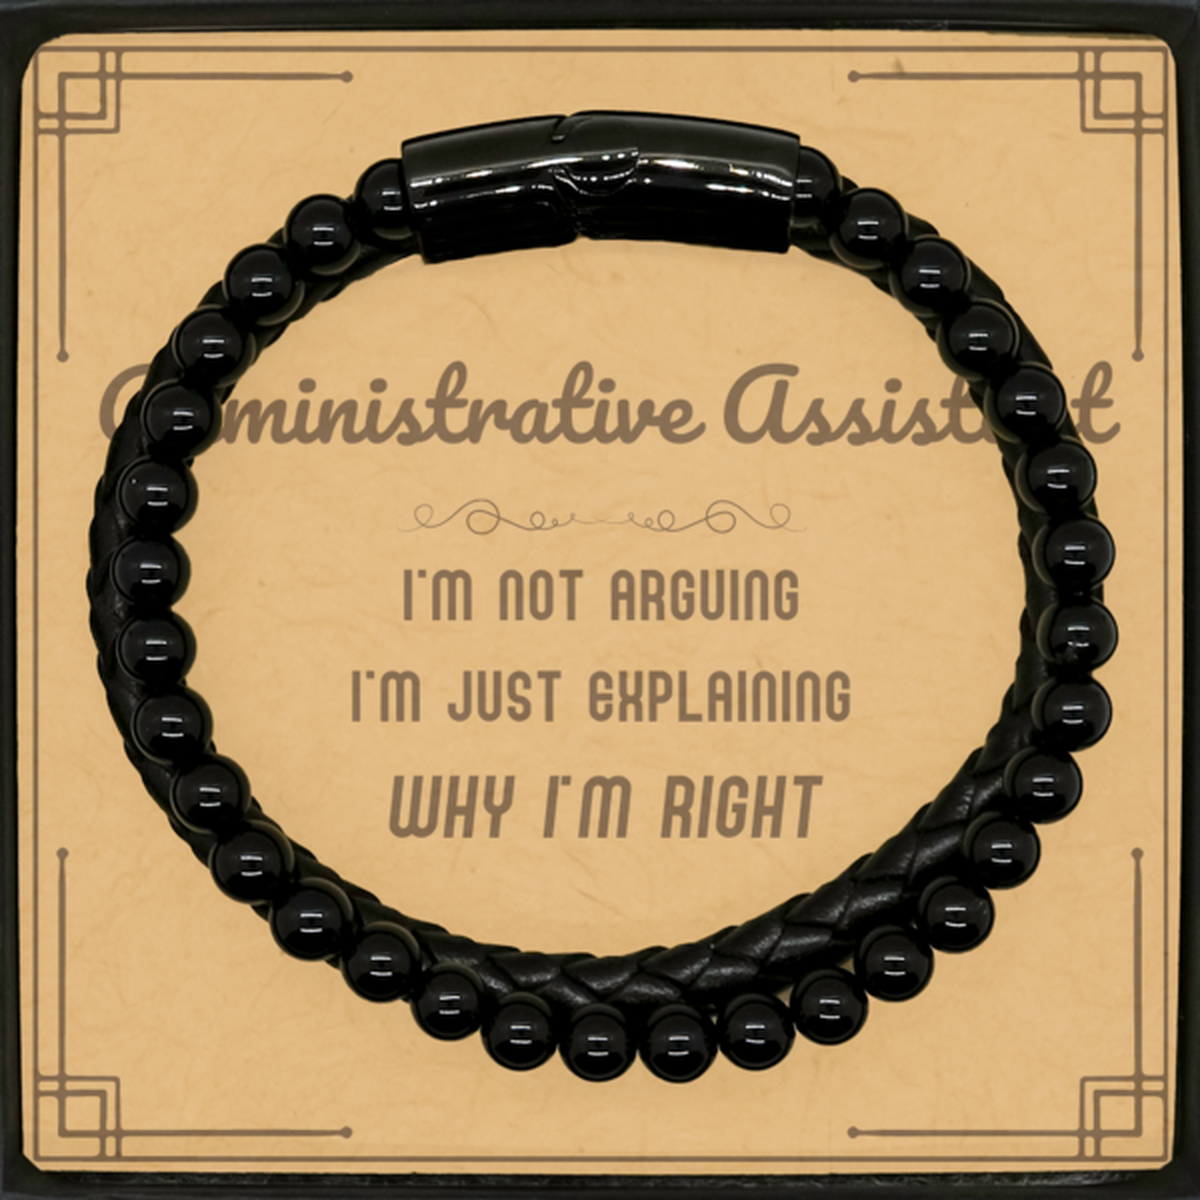 Administrative Assistant I'm not Arguing. I'm Just Explaining Why I'm RIGHT Stone Leather Bracelets, Funny Saying Quote Administrative Assistant Gifts For Administrative Assistant Message Card Graduation Birthday Christmas Gifts for Men Women Coworker